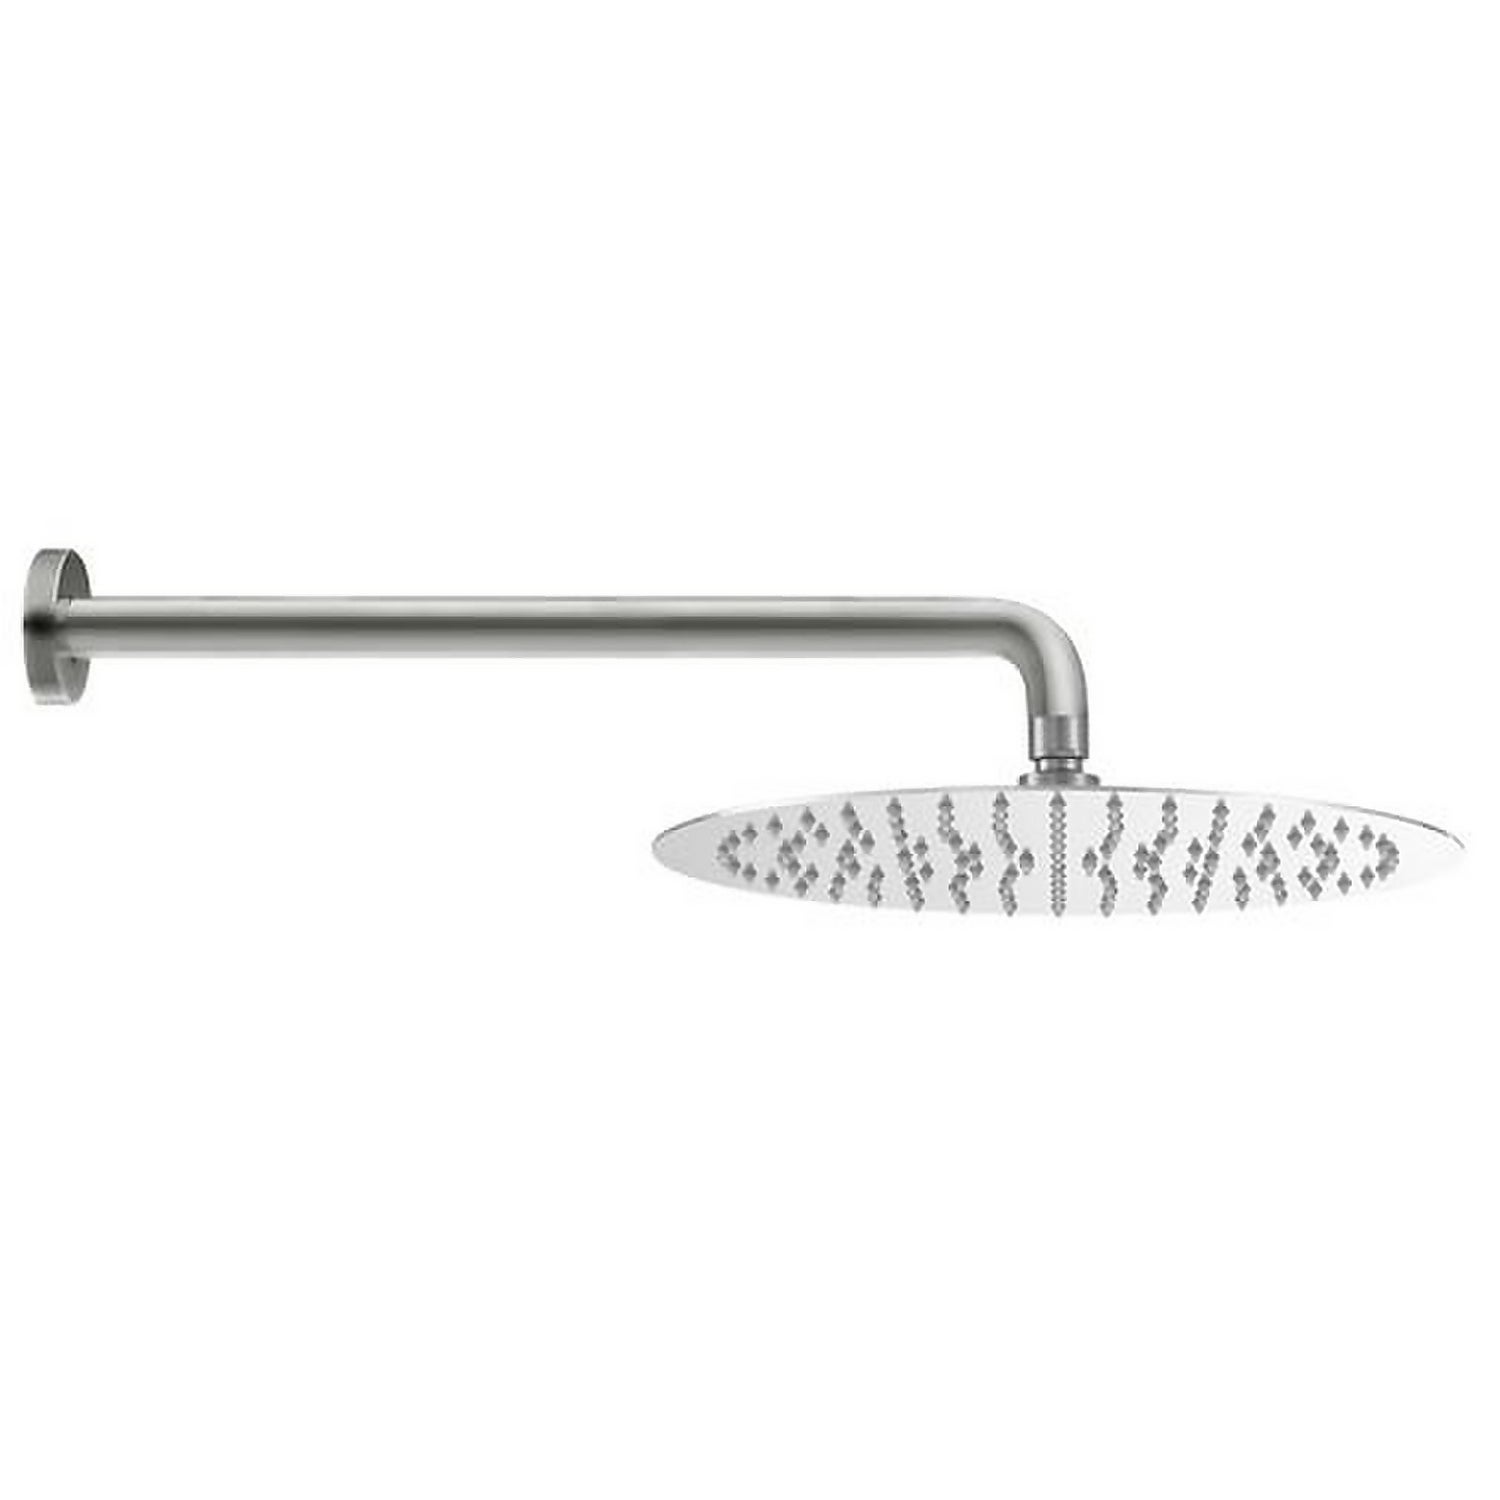 Forge 300mm Shower Head with Wall Arm - Stainless Steel